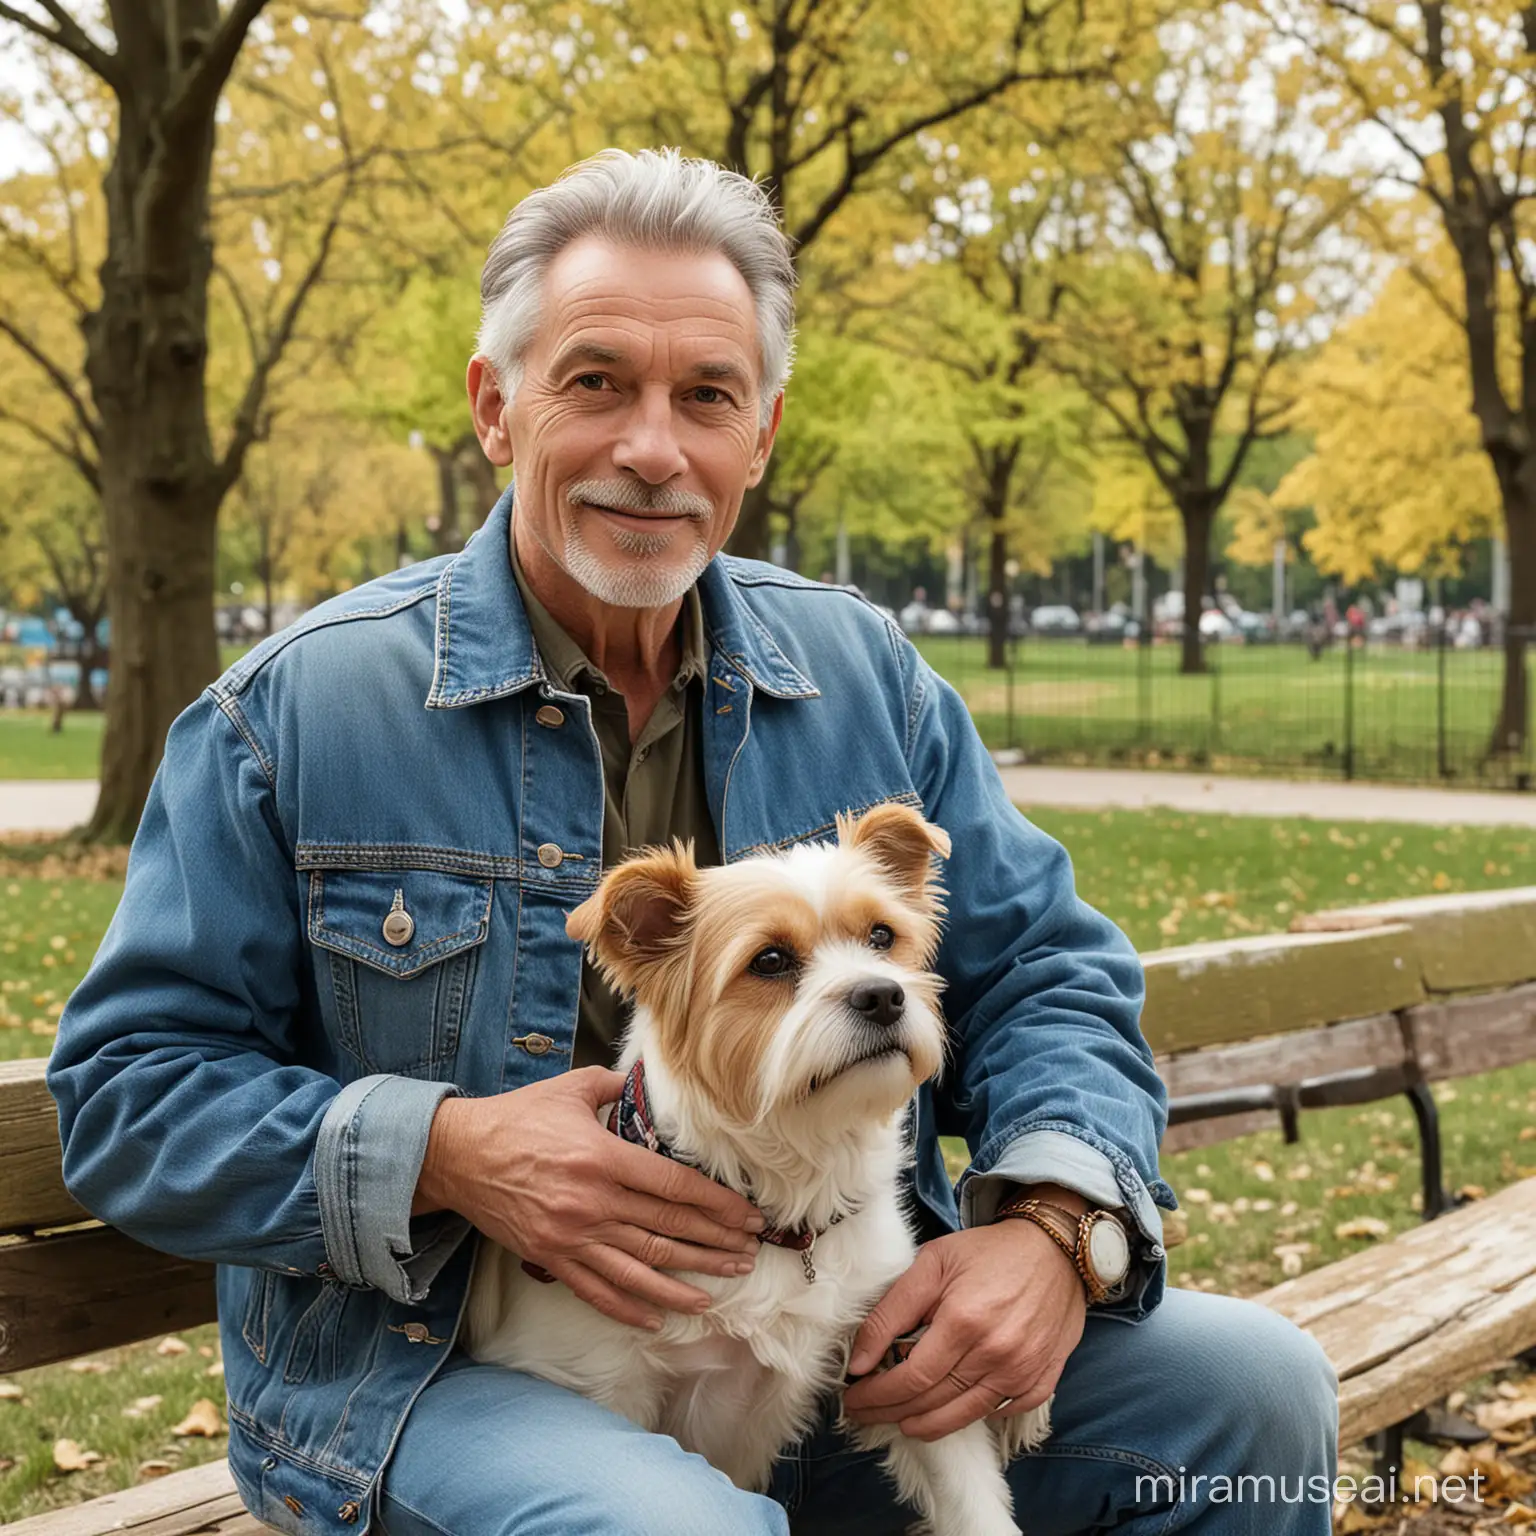 cool 60-year-old wearing a denim jacket in the park with his dog